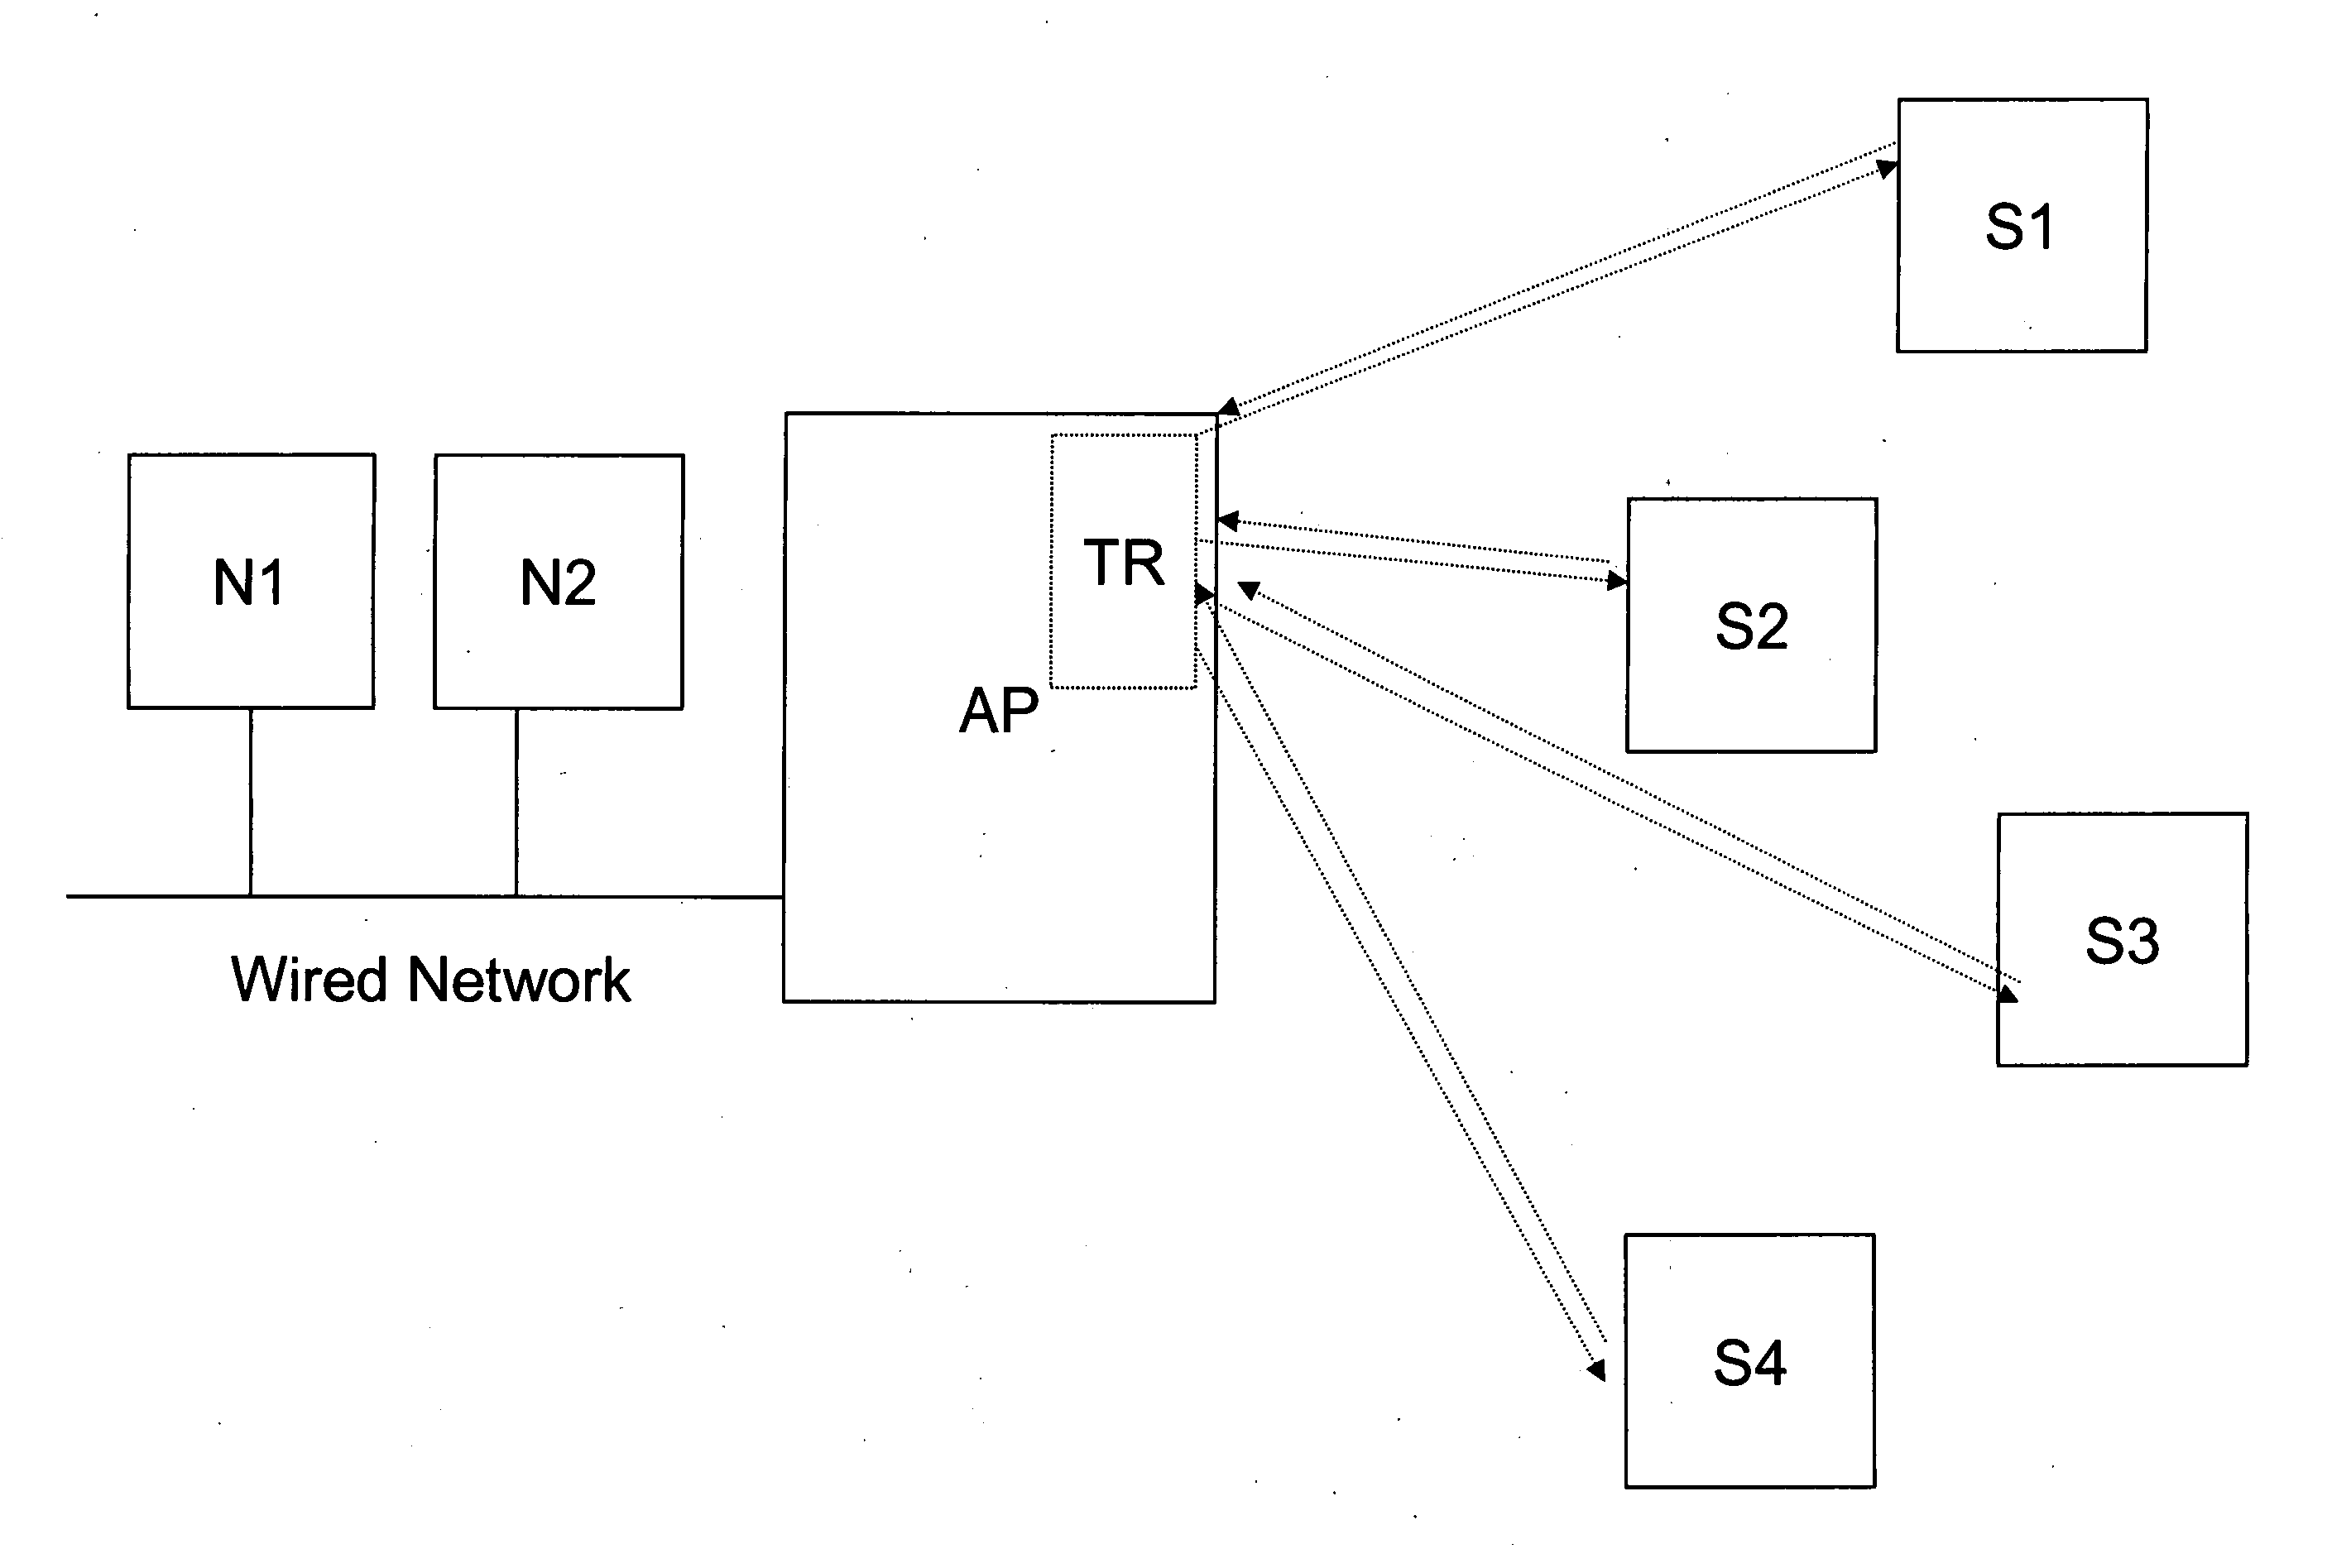 Channel partitioning forwireless local area networks